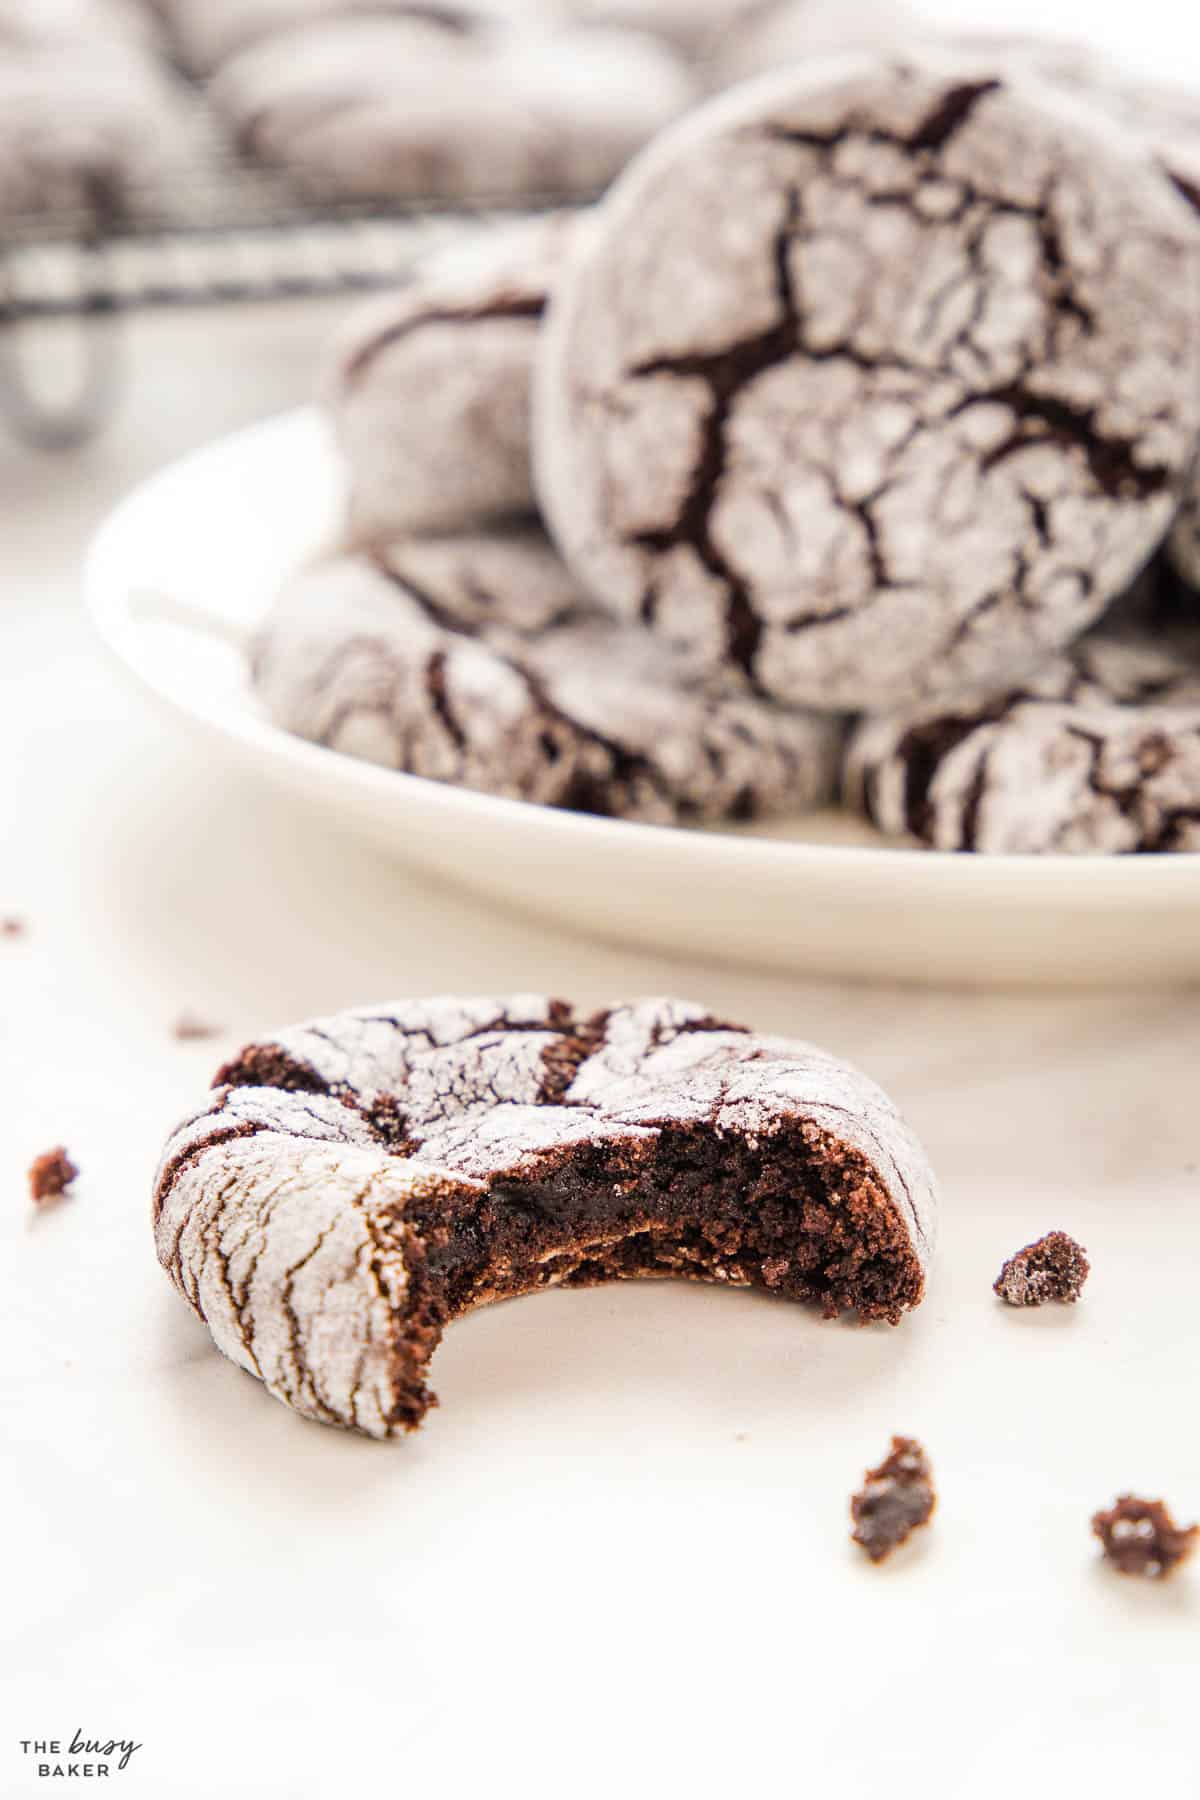 chocolate crinkle cookie with a fudgy interior